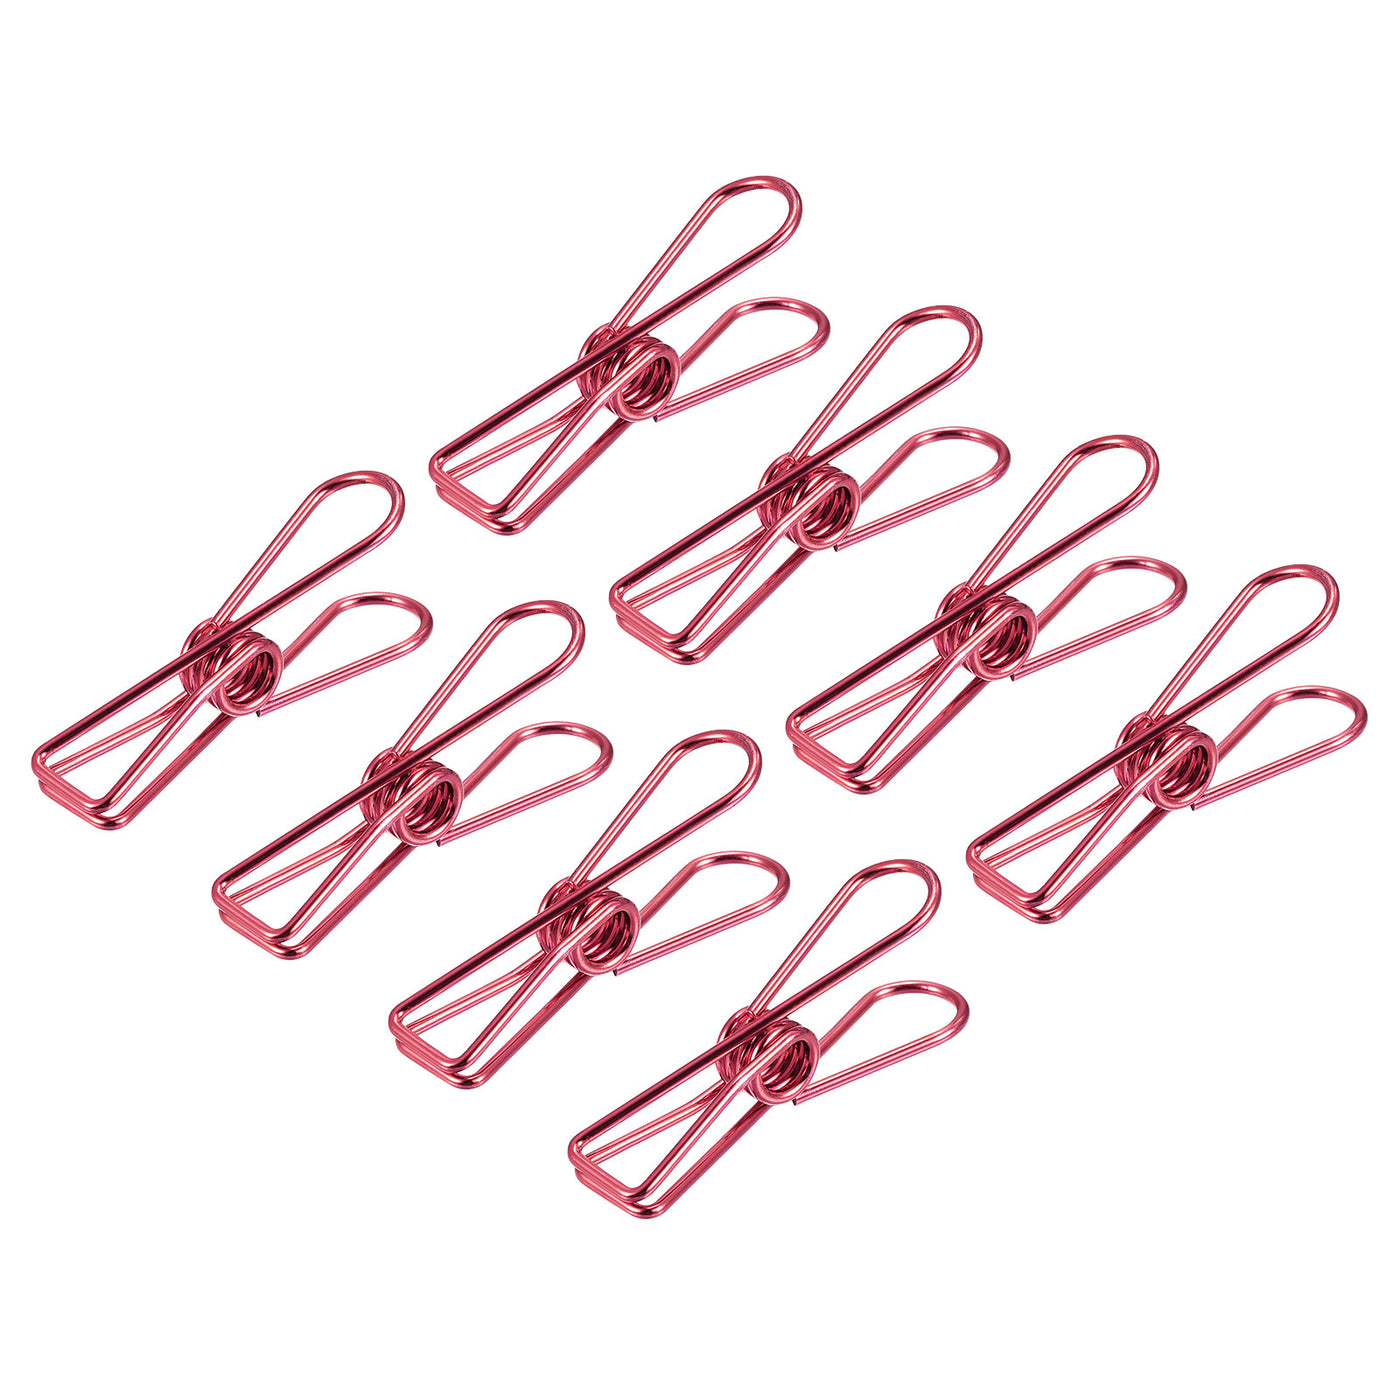 uxcell Uxcell Tablecloth Clips, 32mm Carbon Steel Clamps for Fixing Table Cloth, Red 8 Pcs